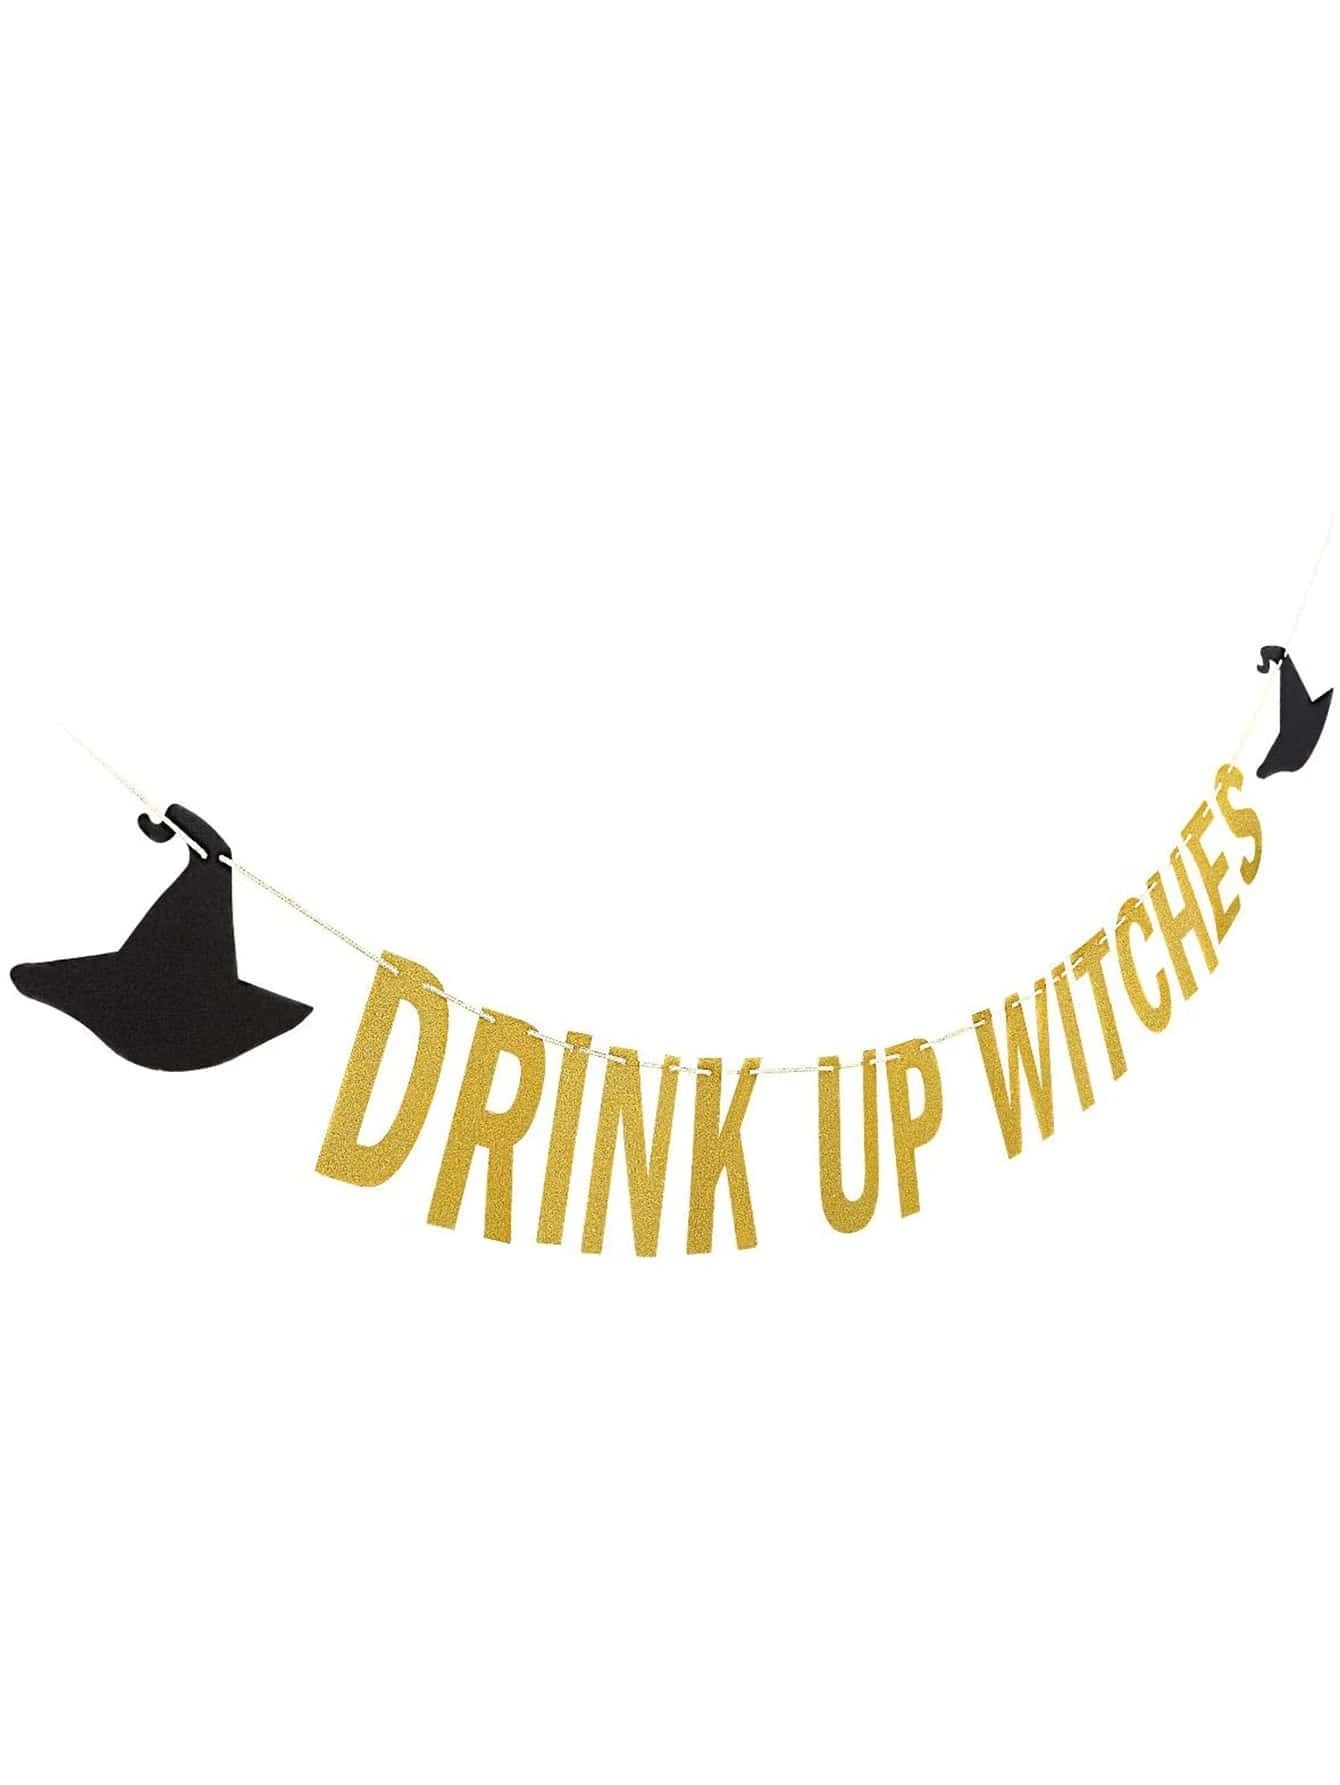 Drink Up Witches Halloween Party Banner